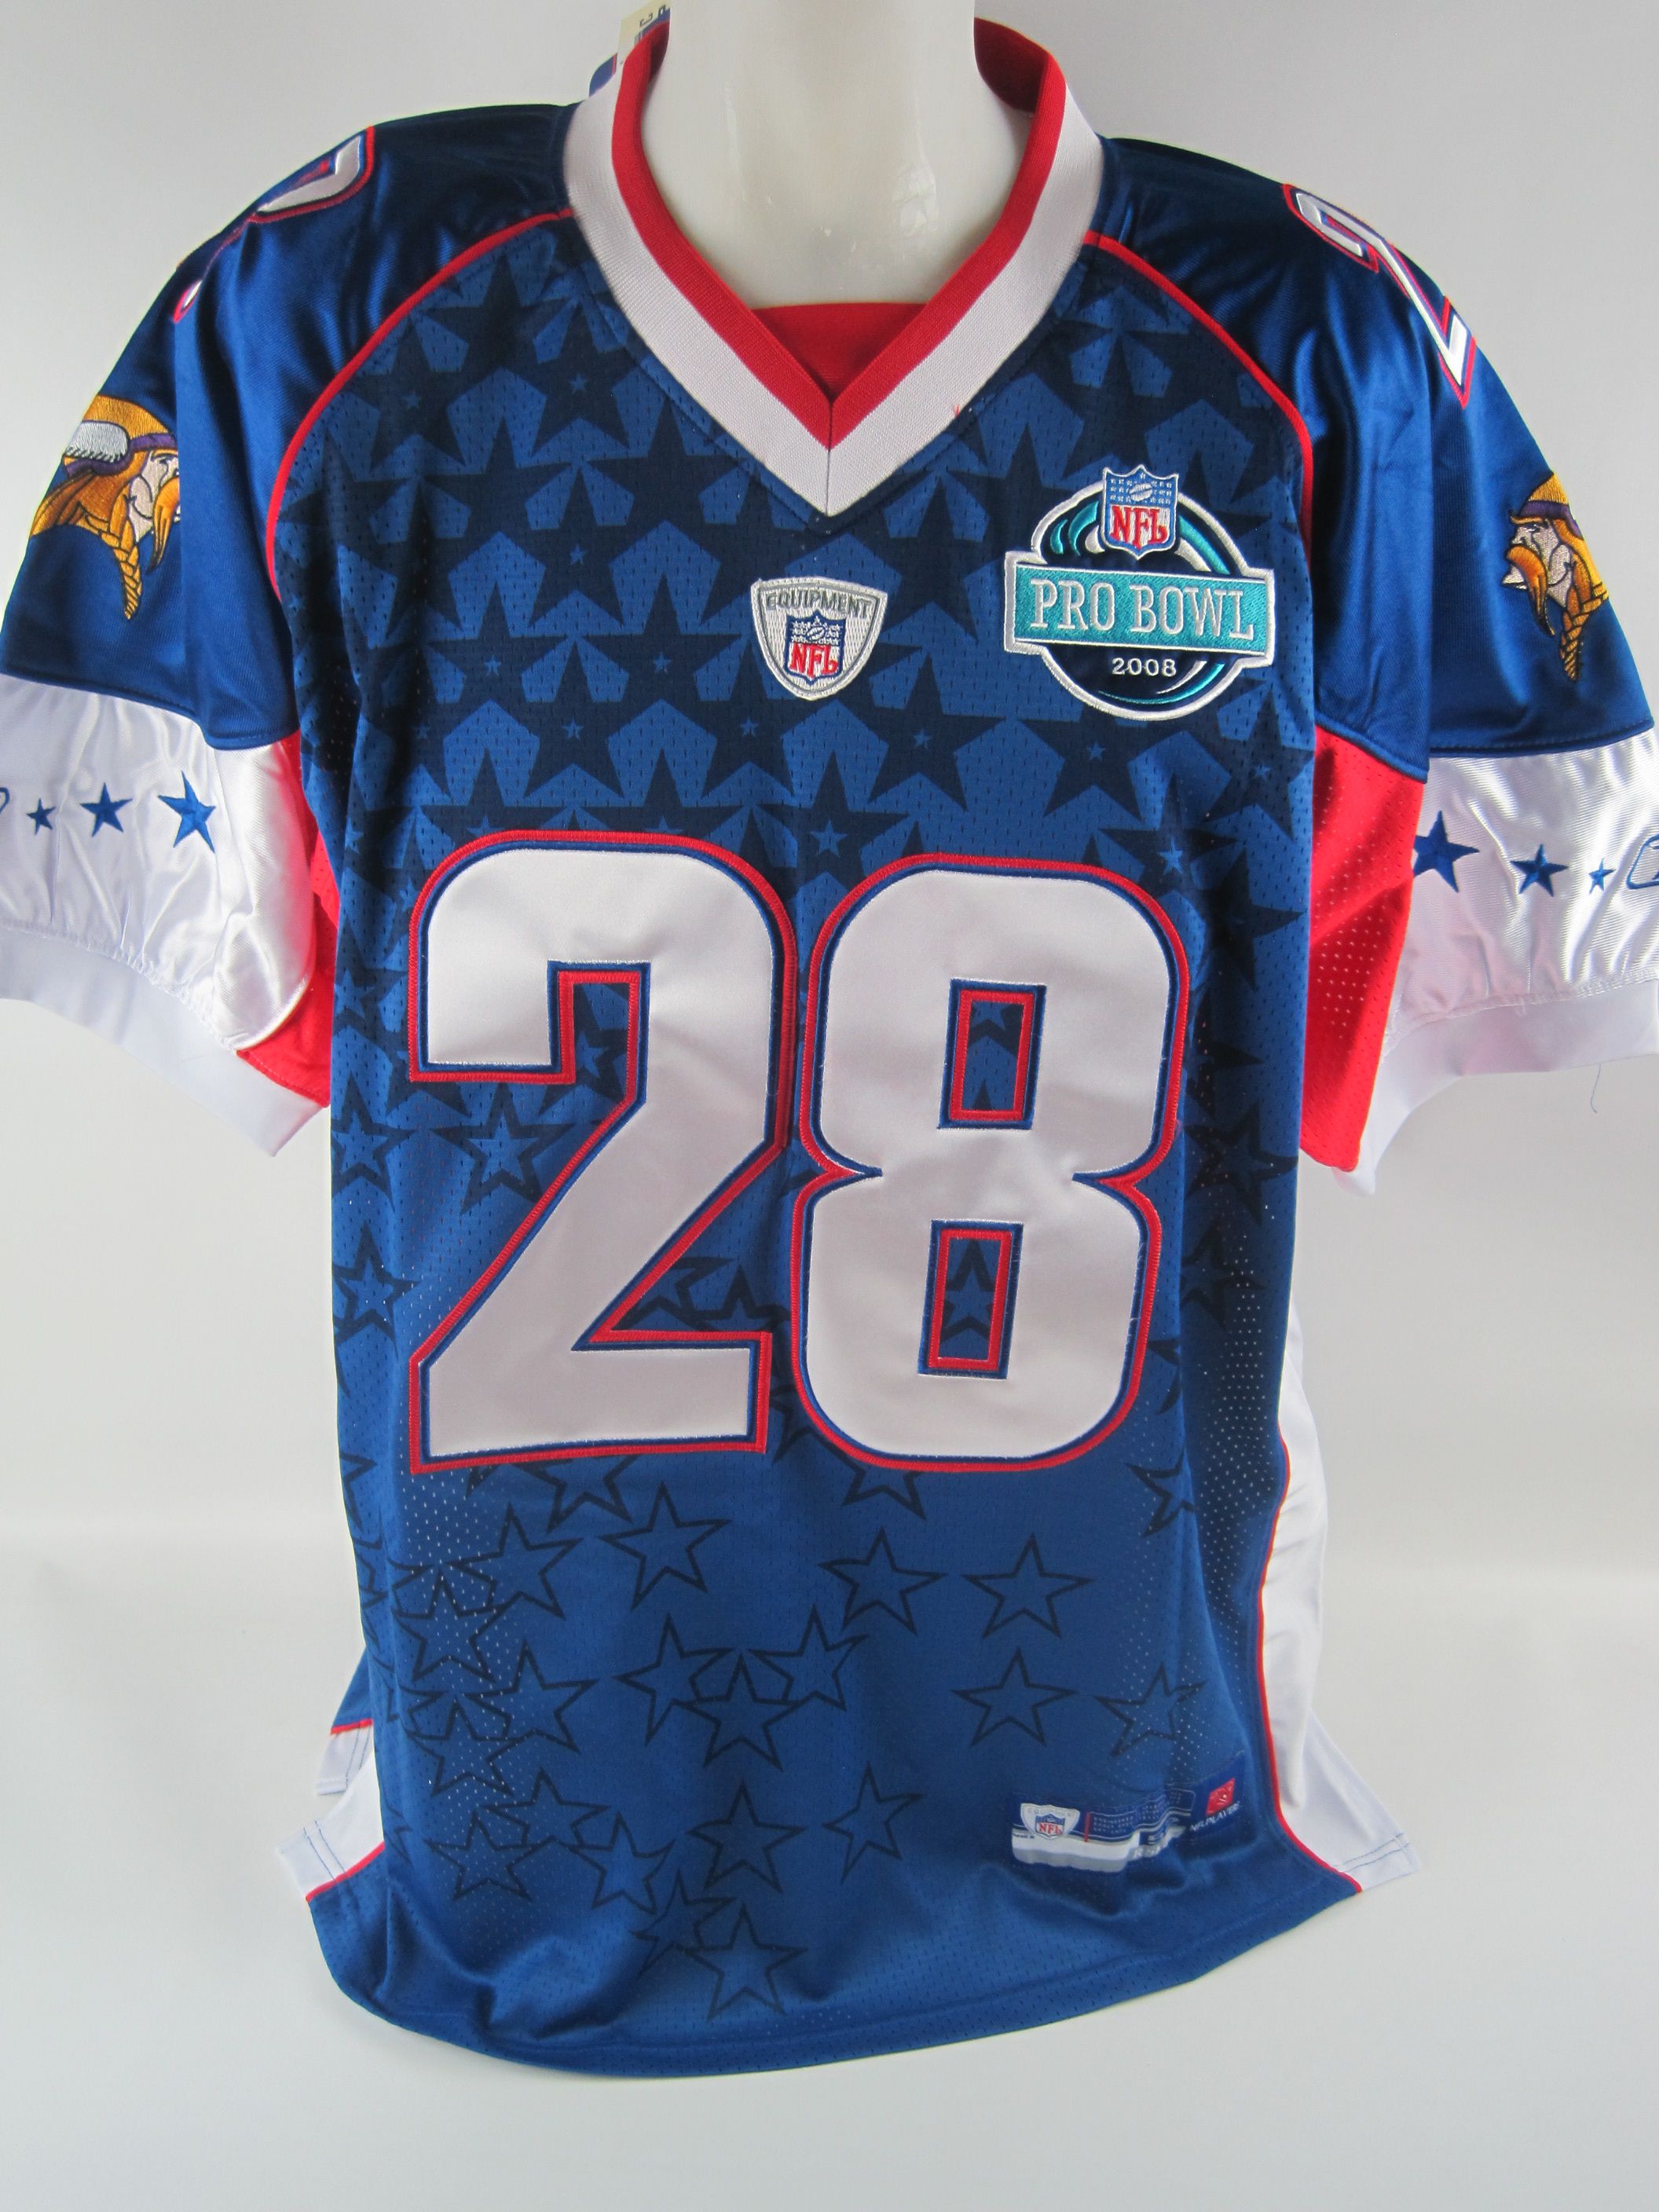 adrian peterson pro bowl jersey off 58 